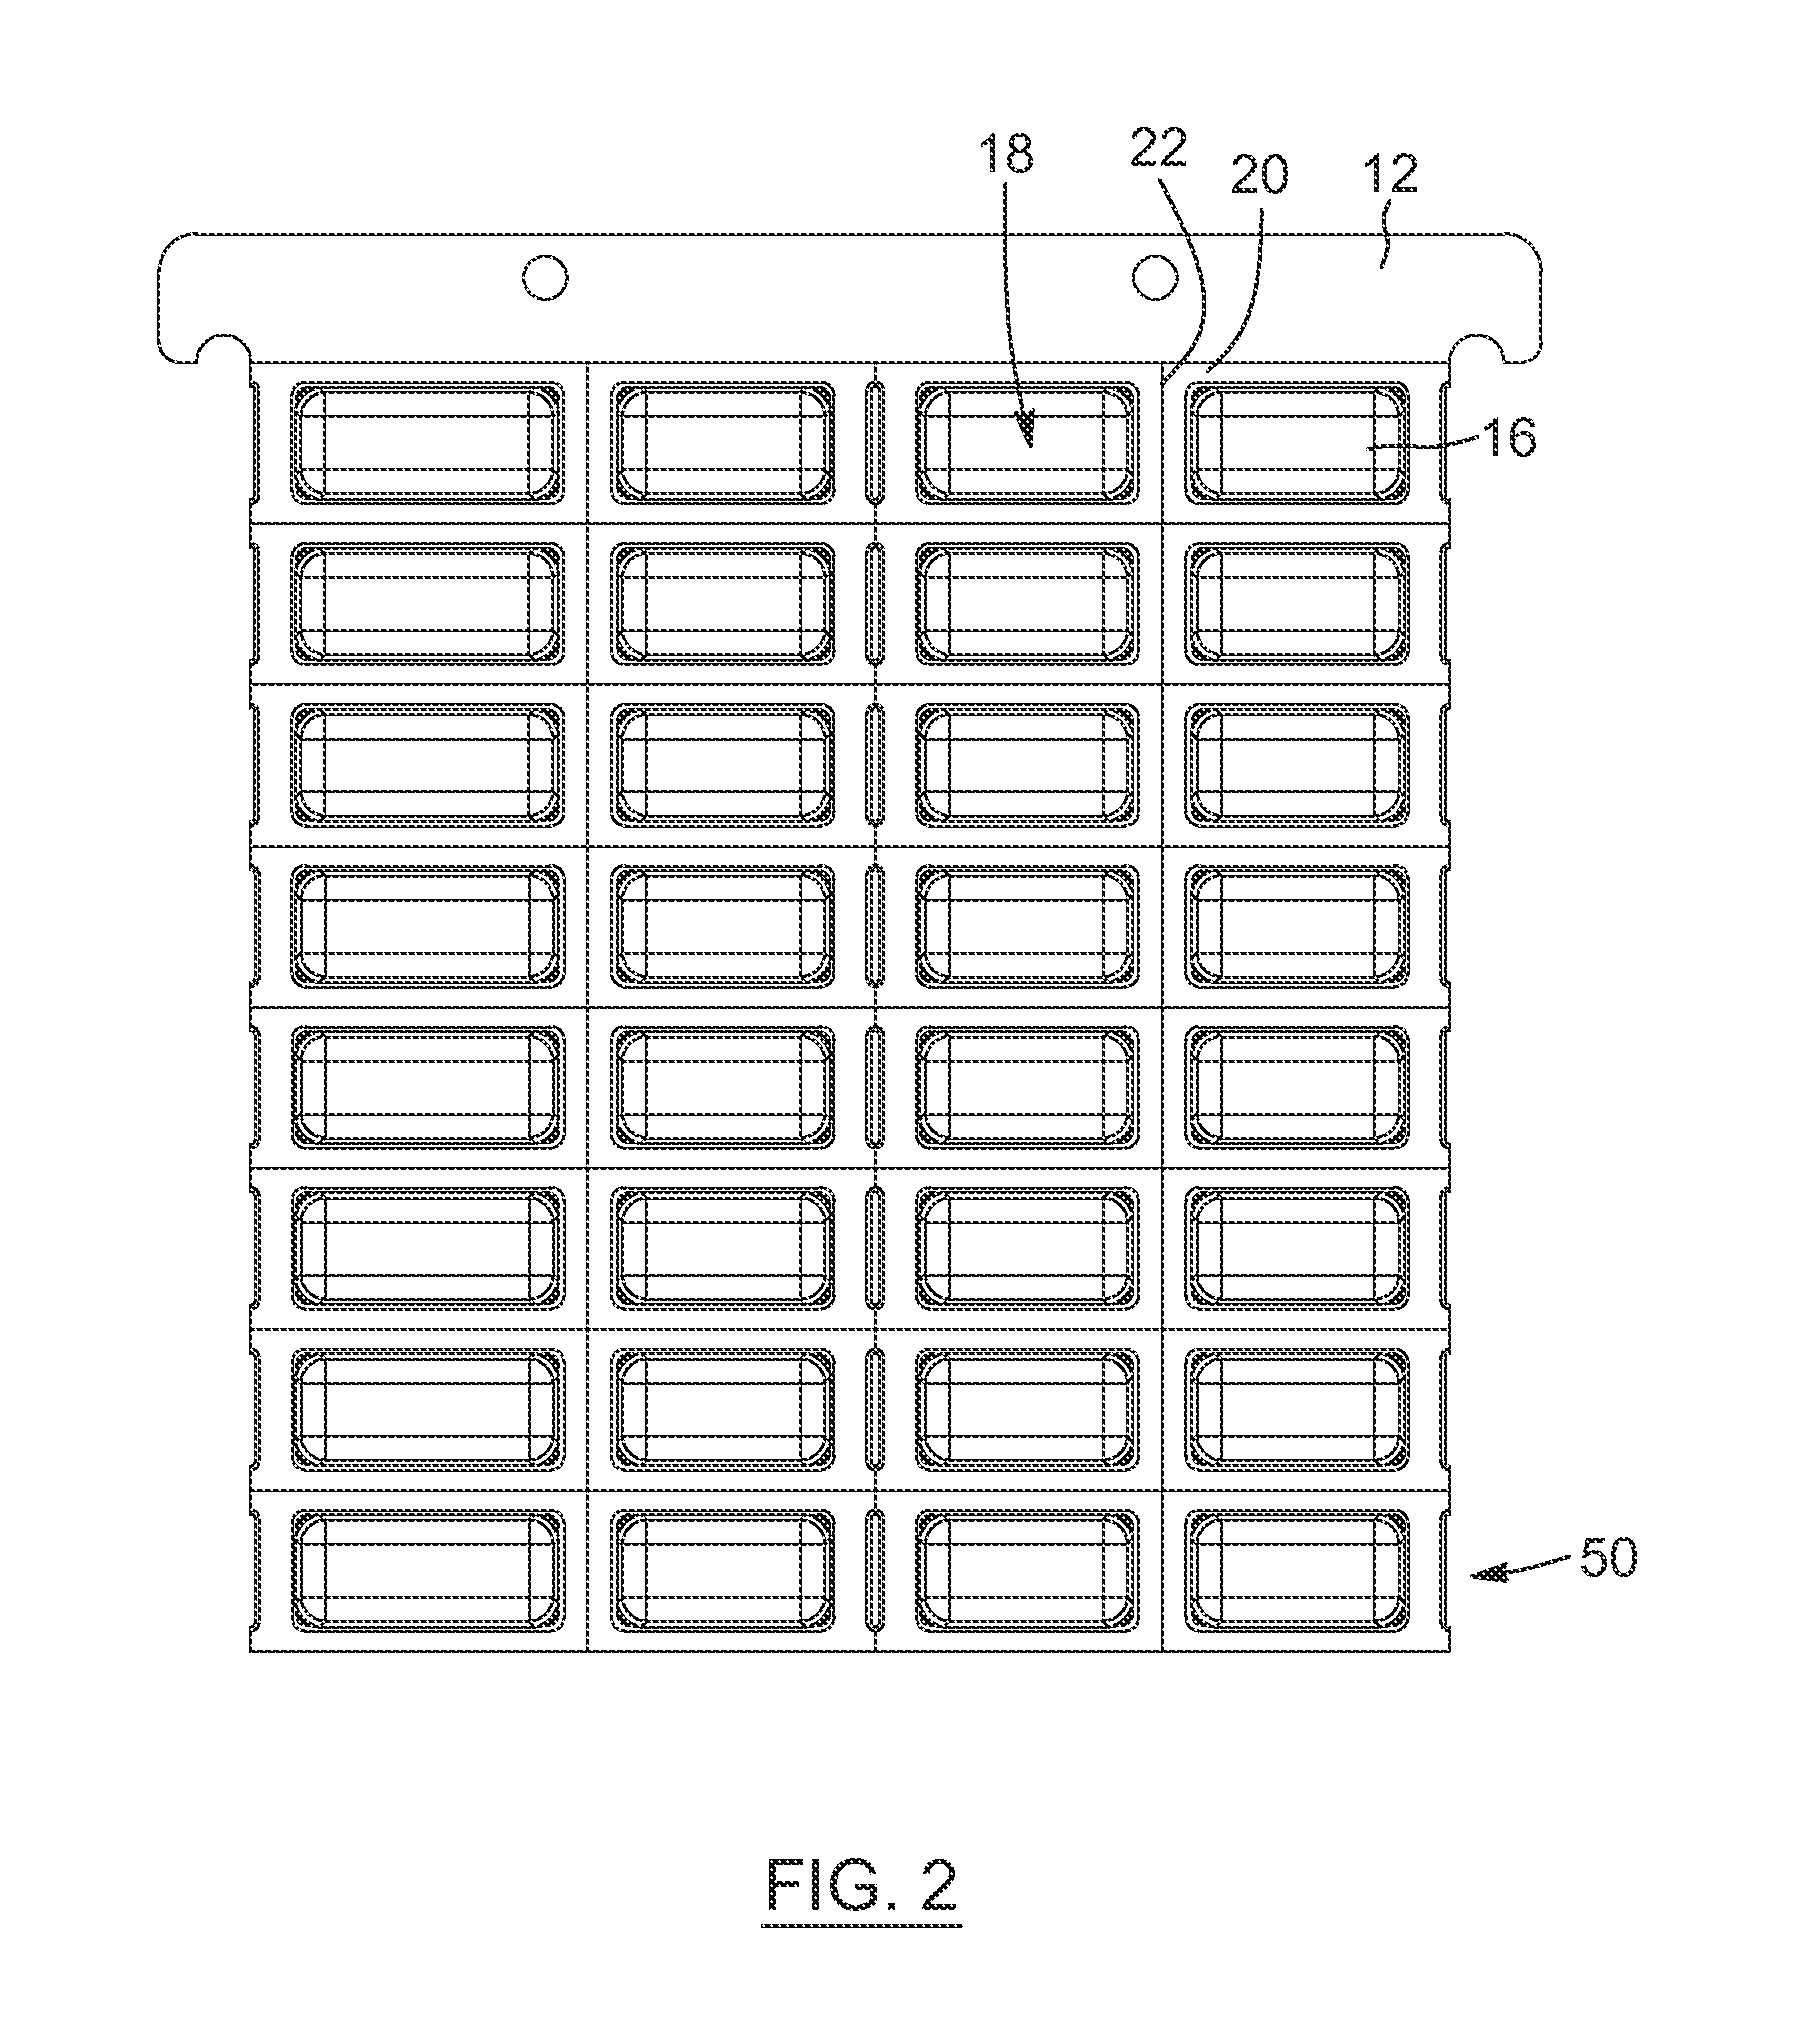 Sealing sheet for closing a container-defining sheet reconfigurable between different dosage schedules